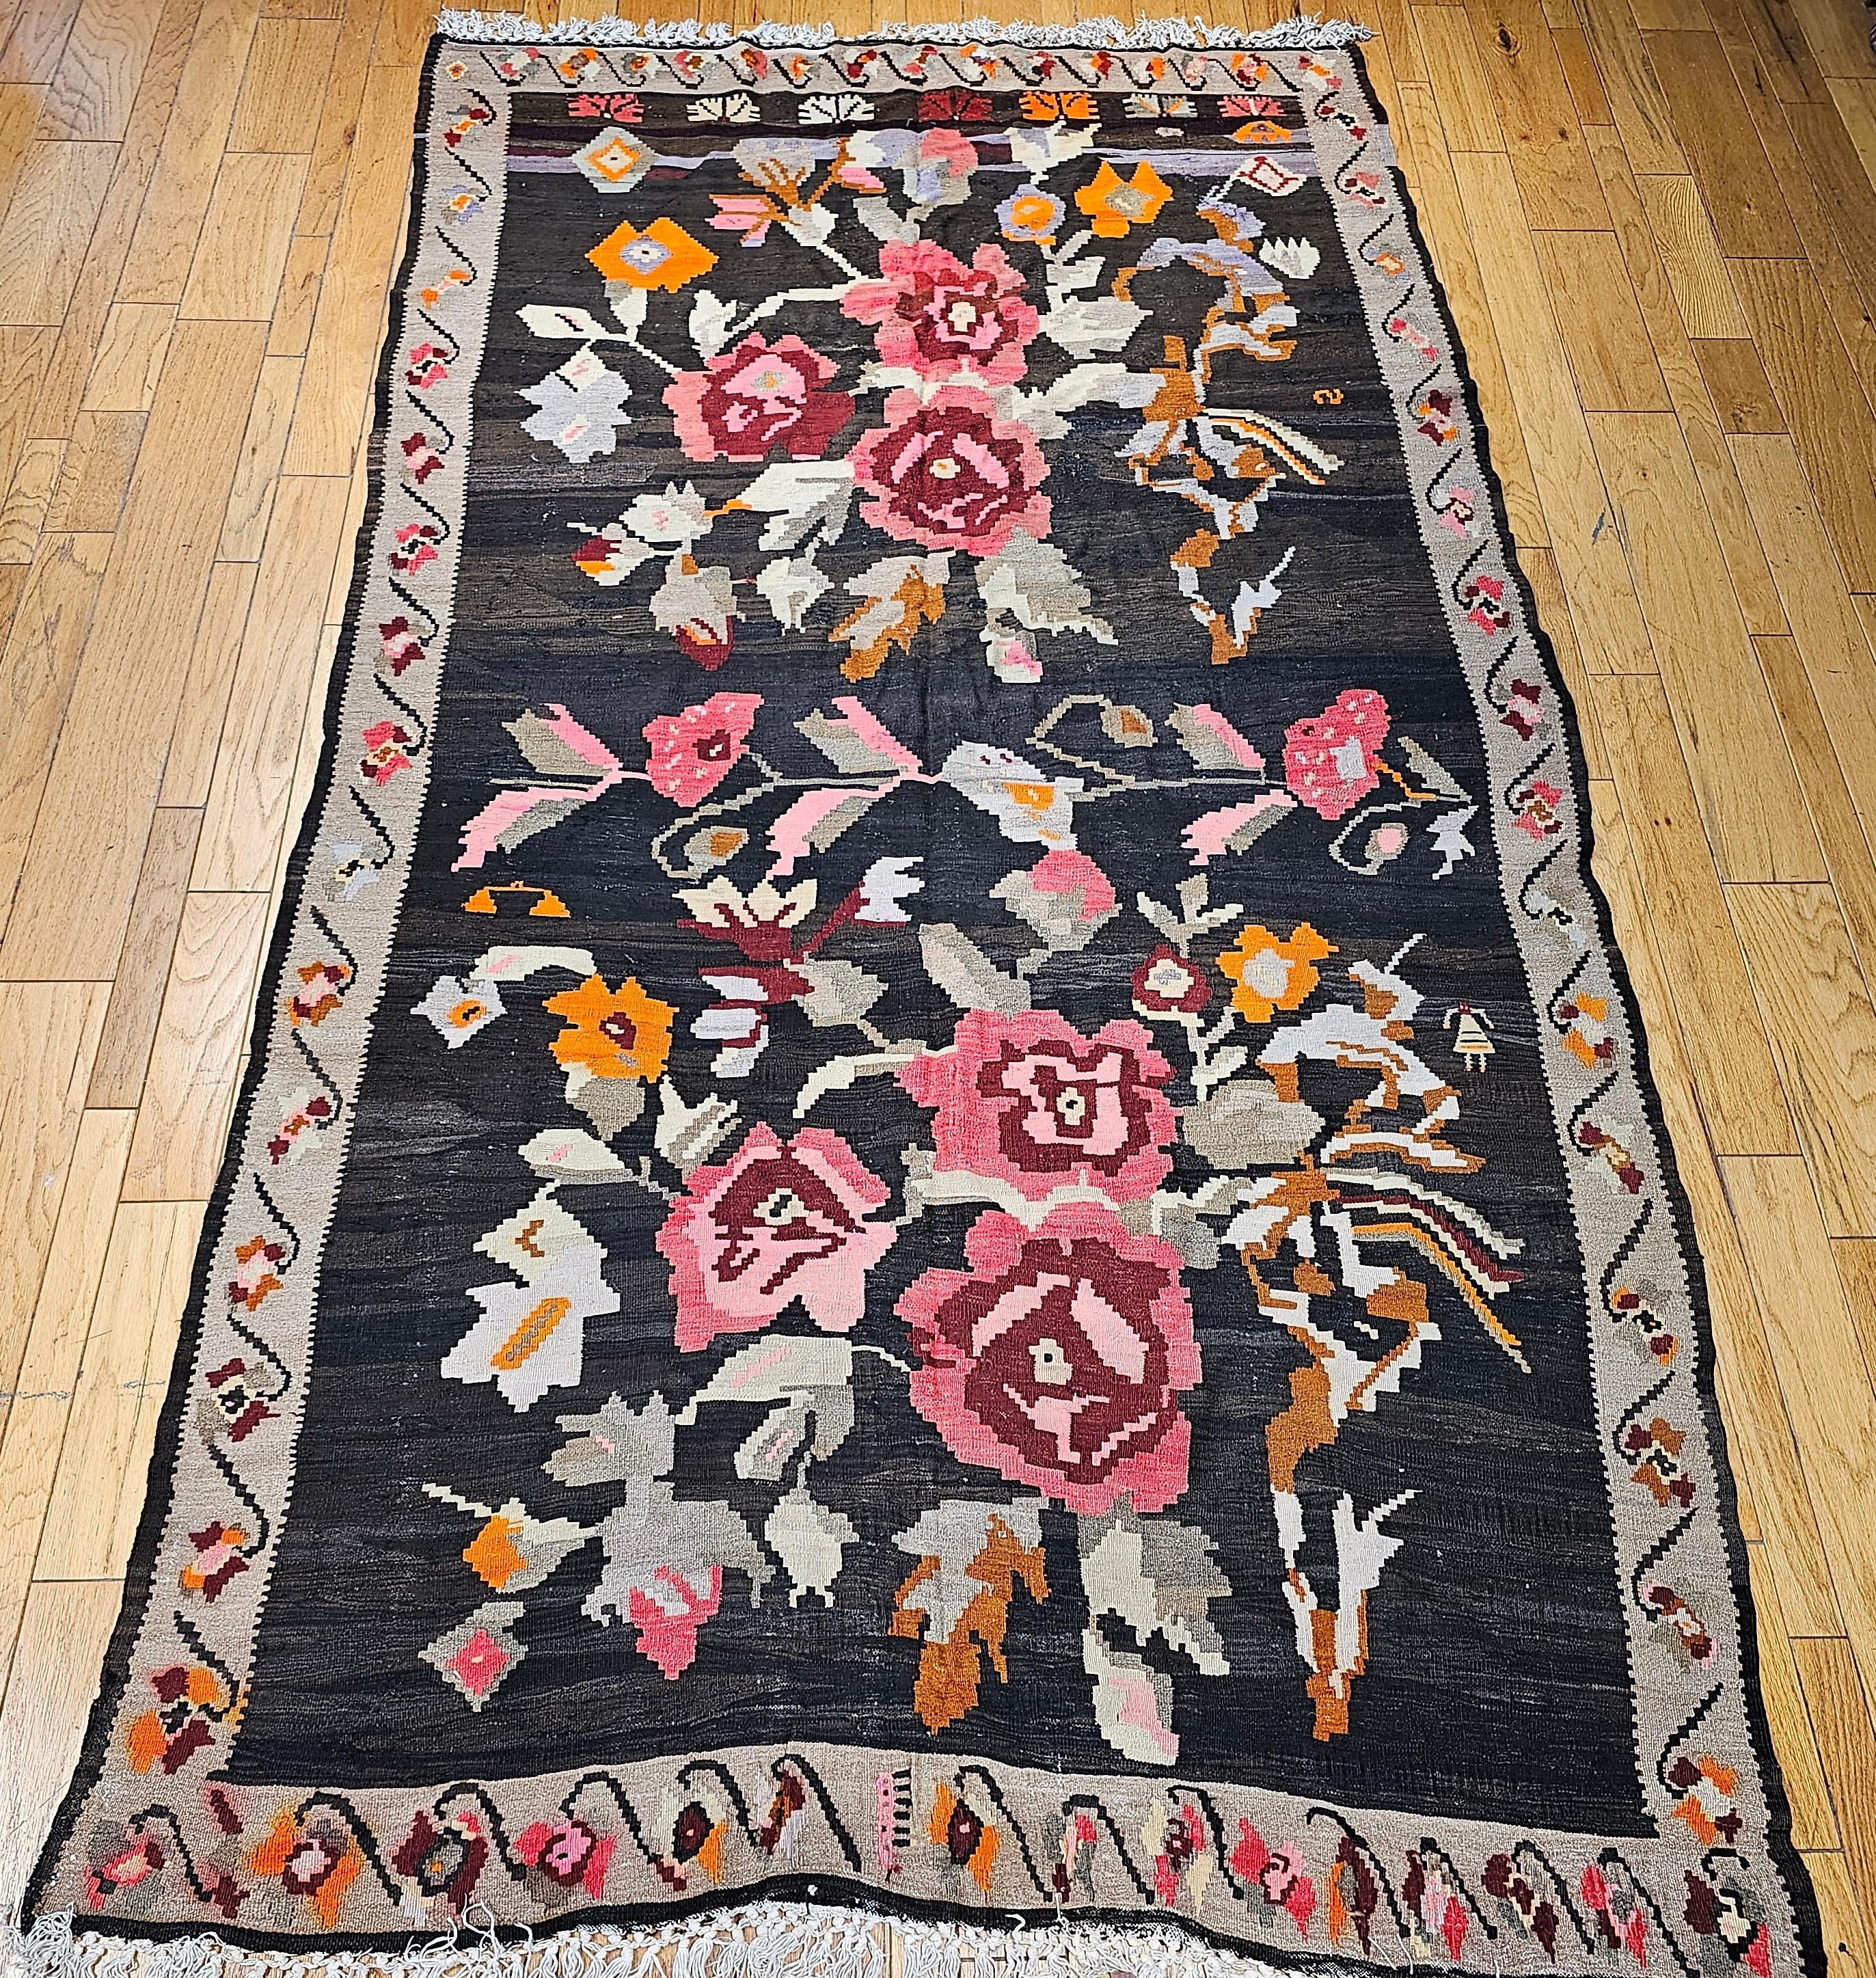 Vintage Karabagh Kilim gallery or room size rug with large floral design and vibrant colors from the early 1900s.   The kilim has bright and beautiful colors used in the two floral bouquets that cover the dark chocolate /brown field.  The floral